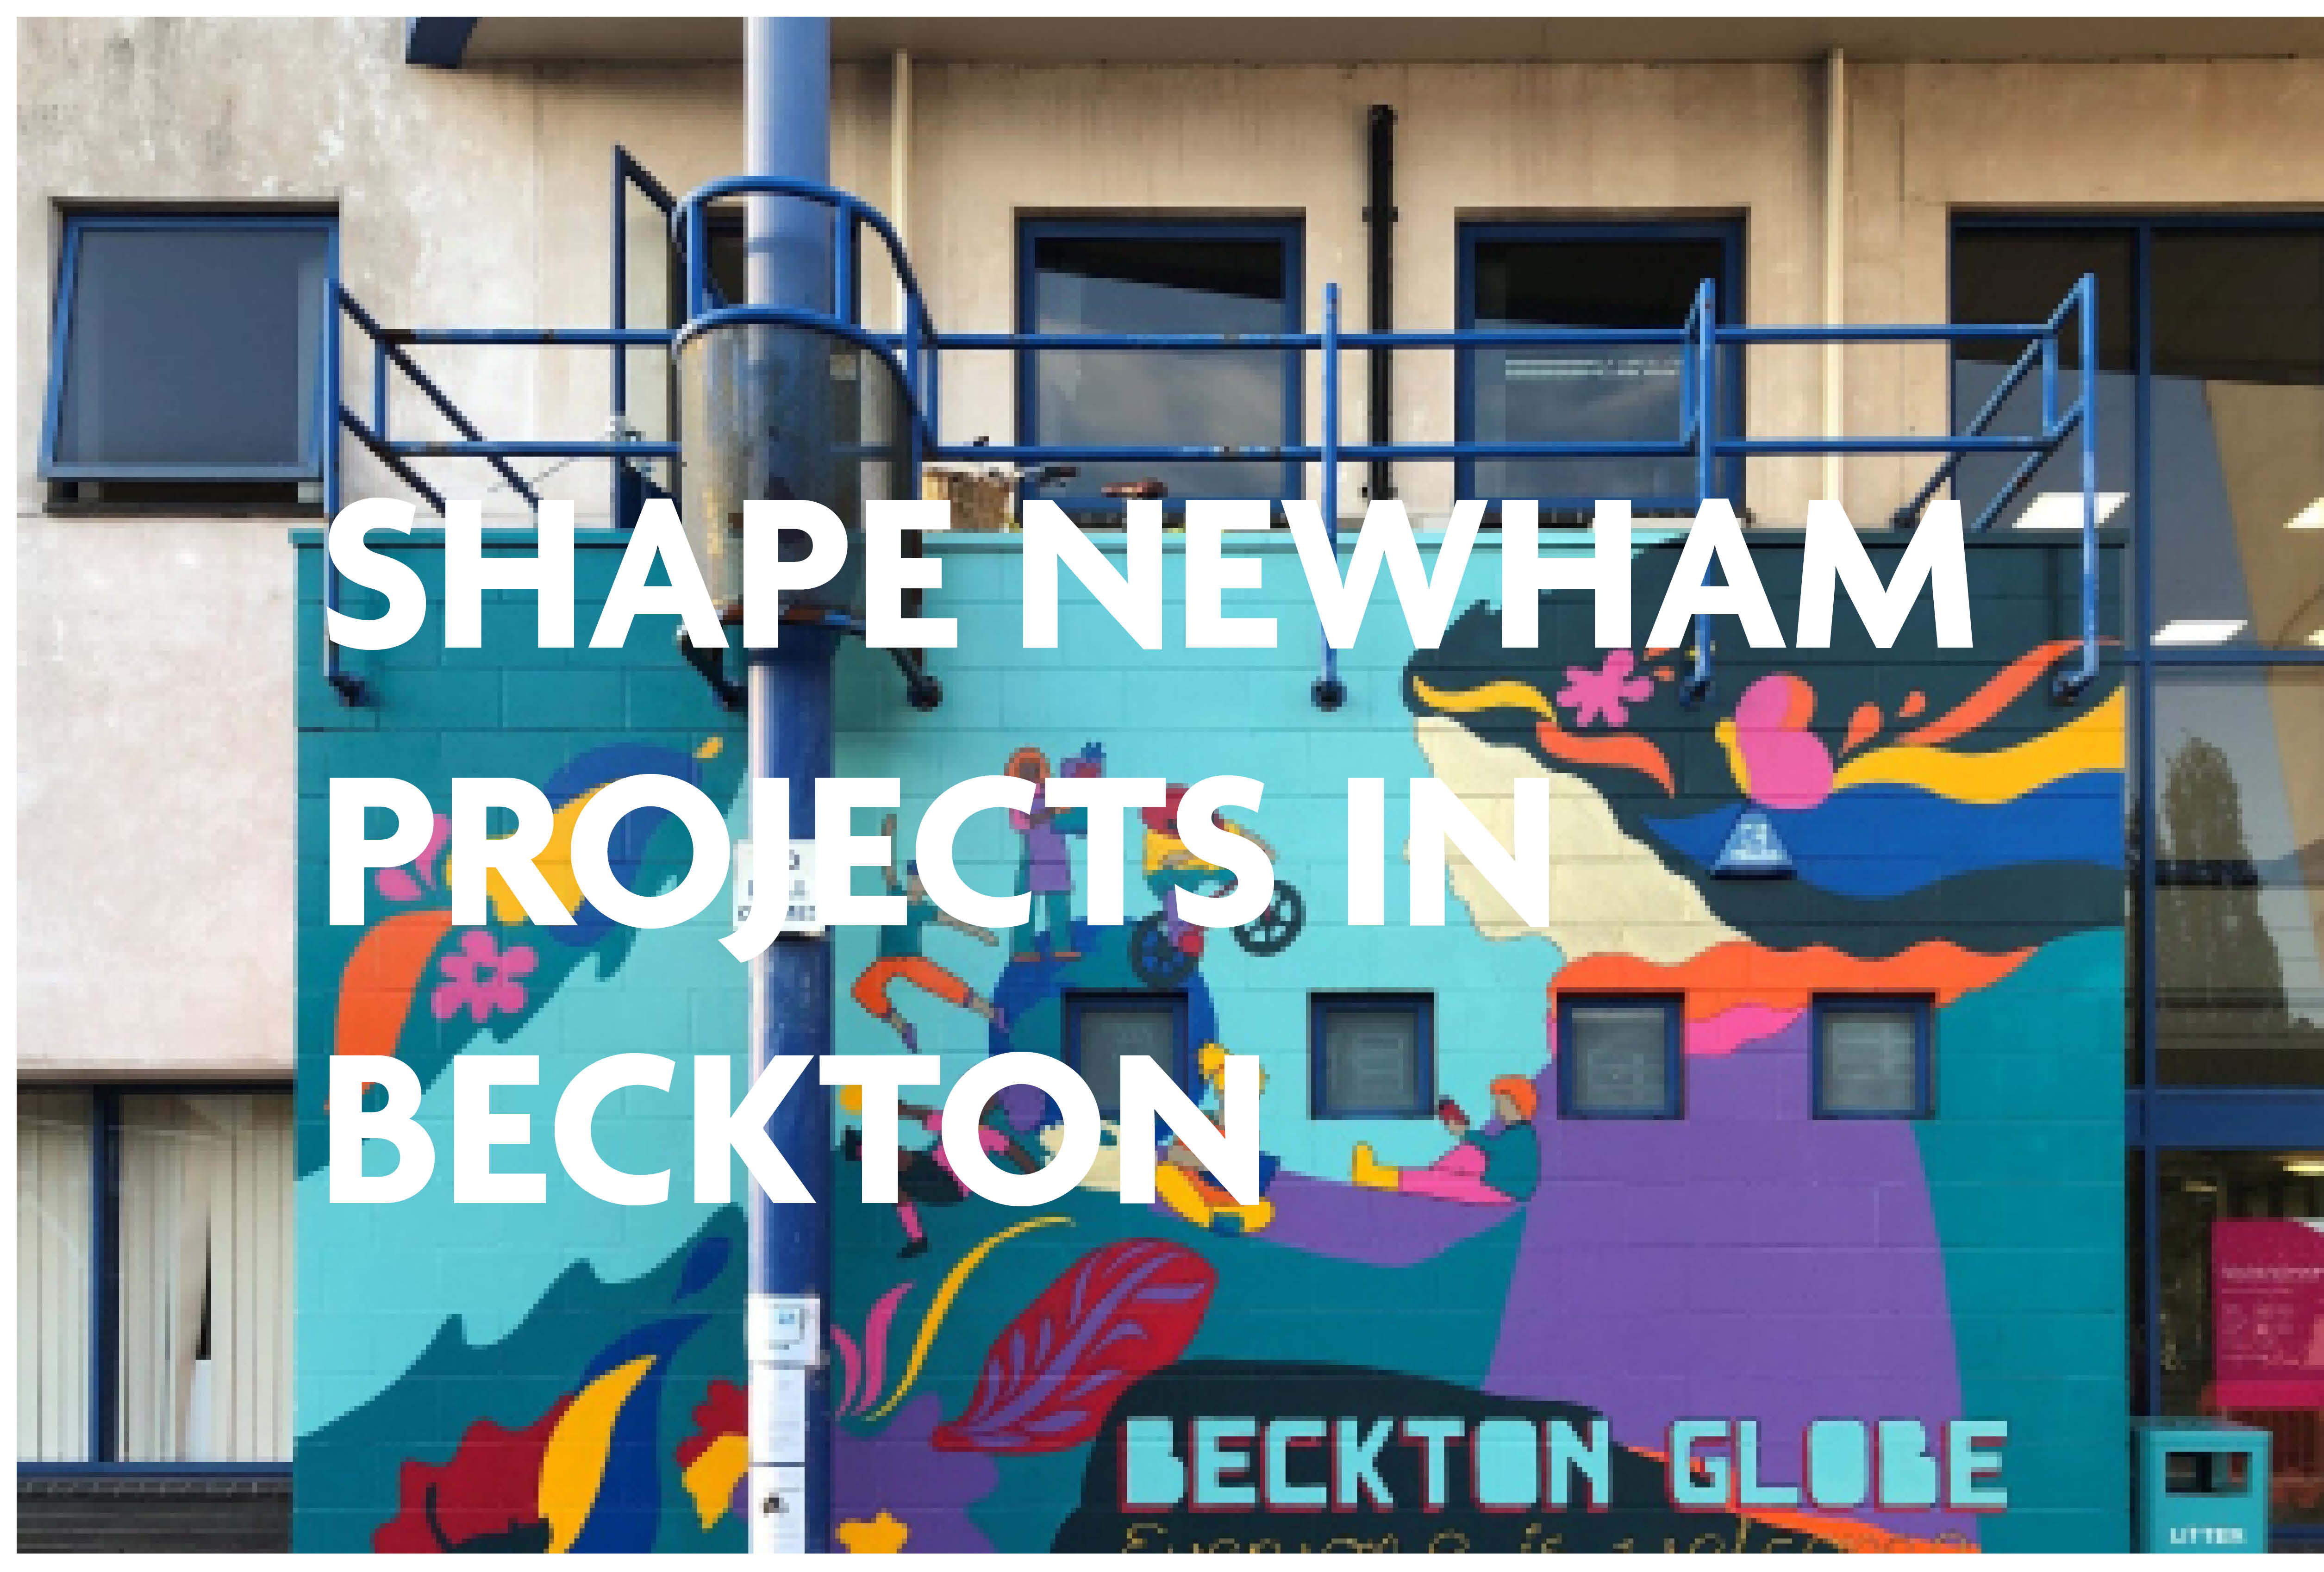 Projects in Beckton